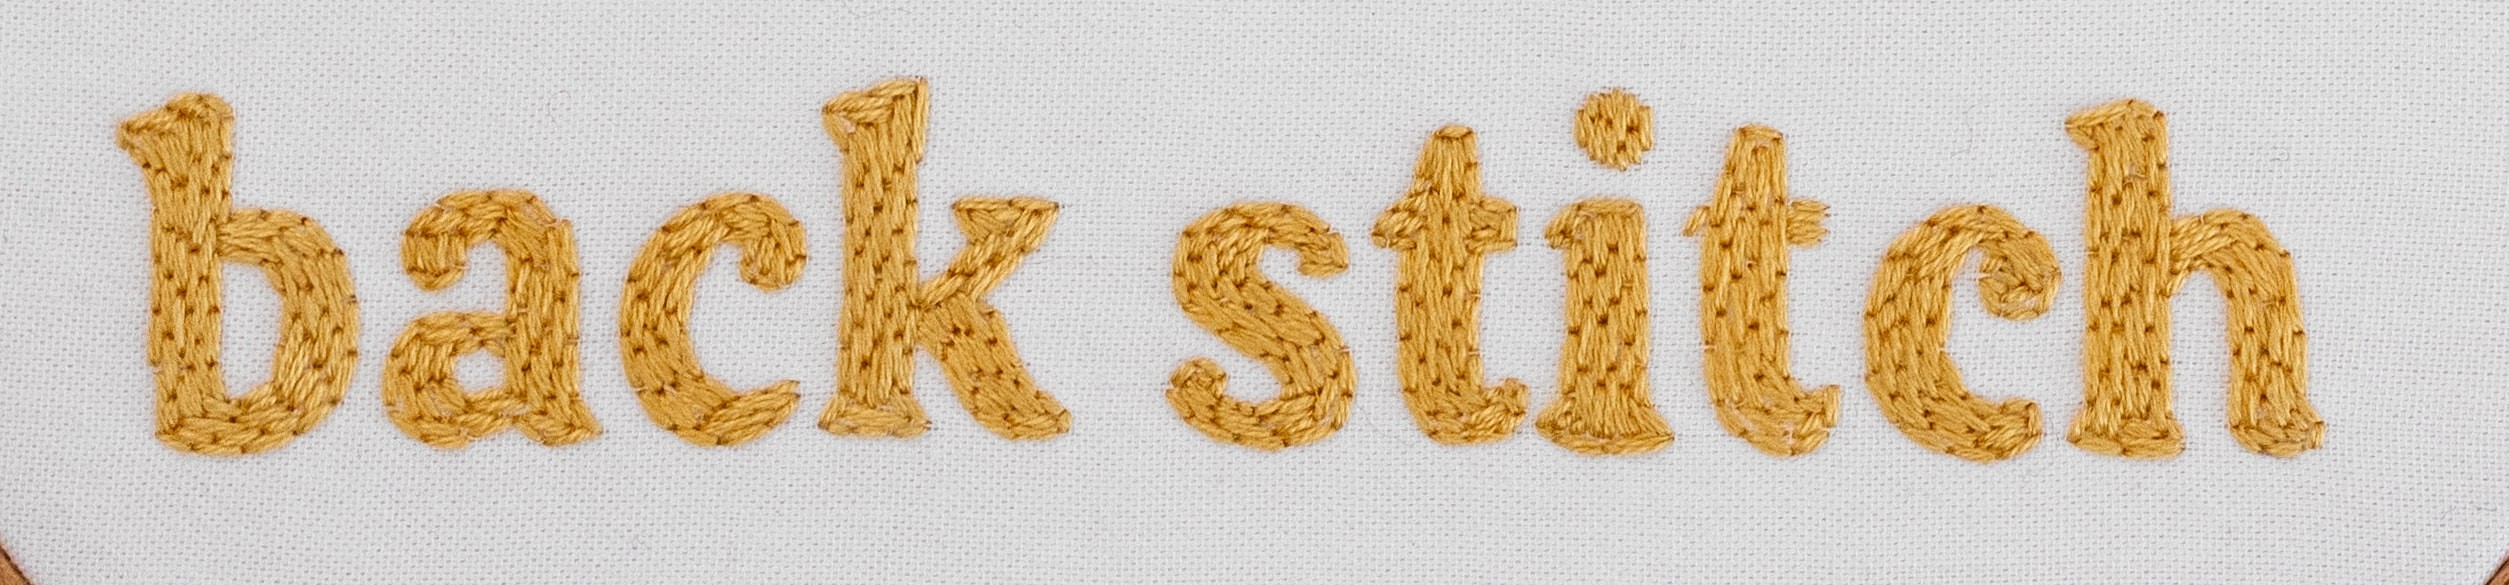 This is the word 'back stitch' is stitched using back stitch.